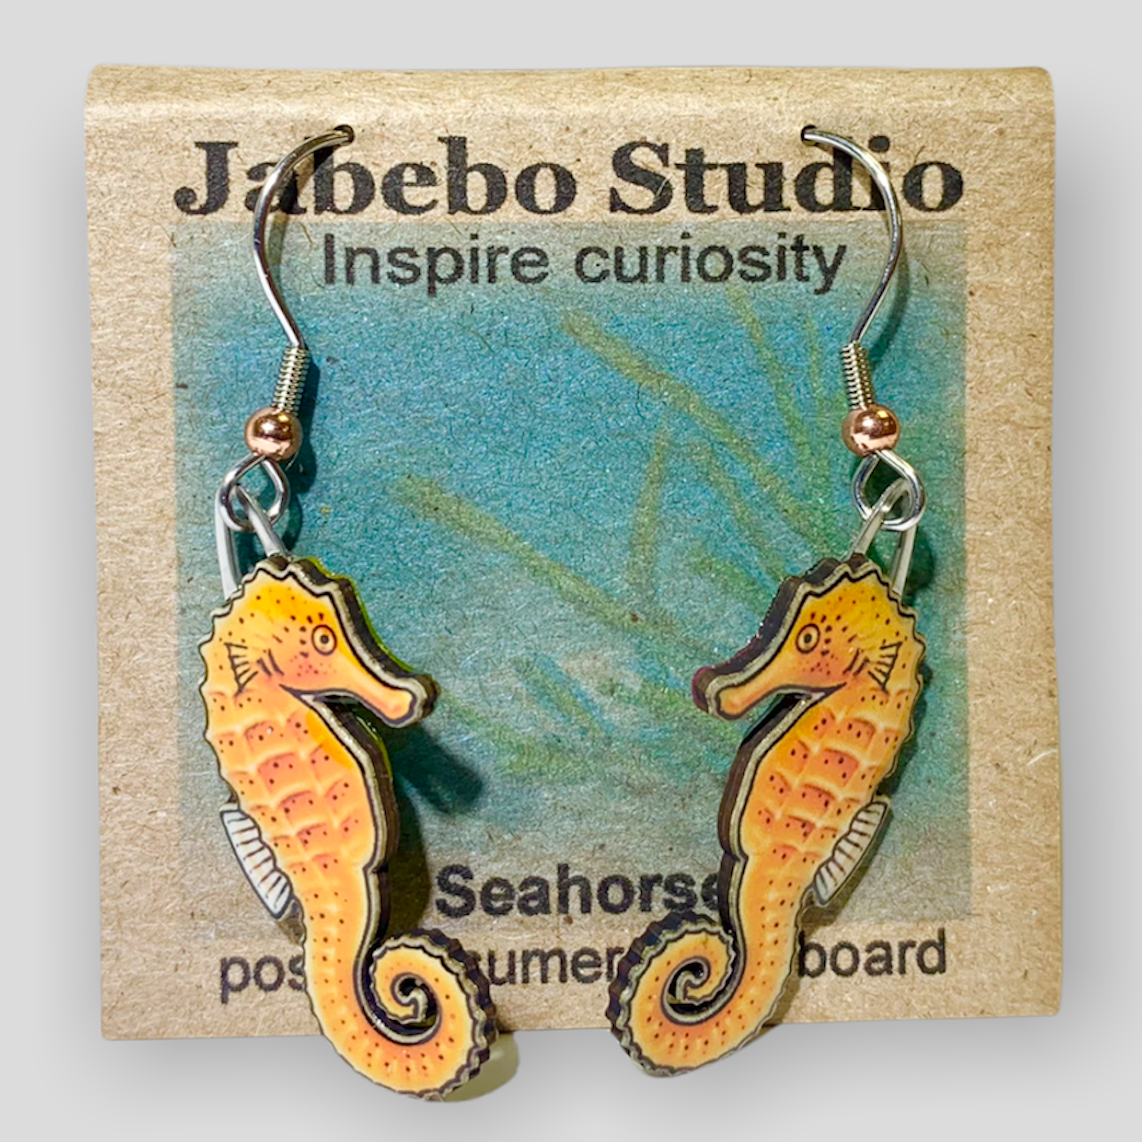 Picture shown is of 1 inch tall pair of earrings of the marine animal the Orange Seahorse.